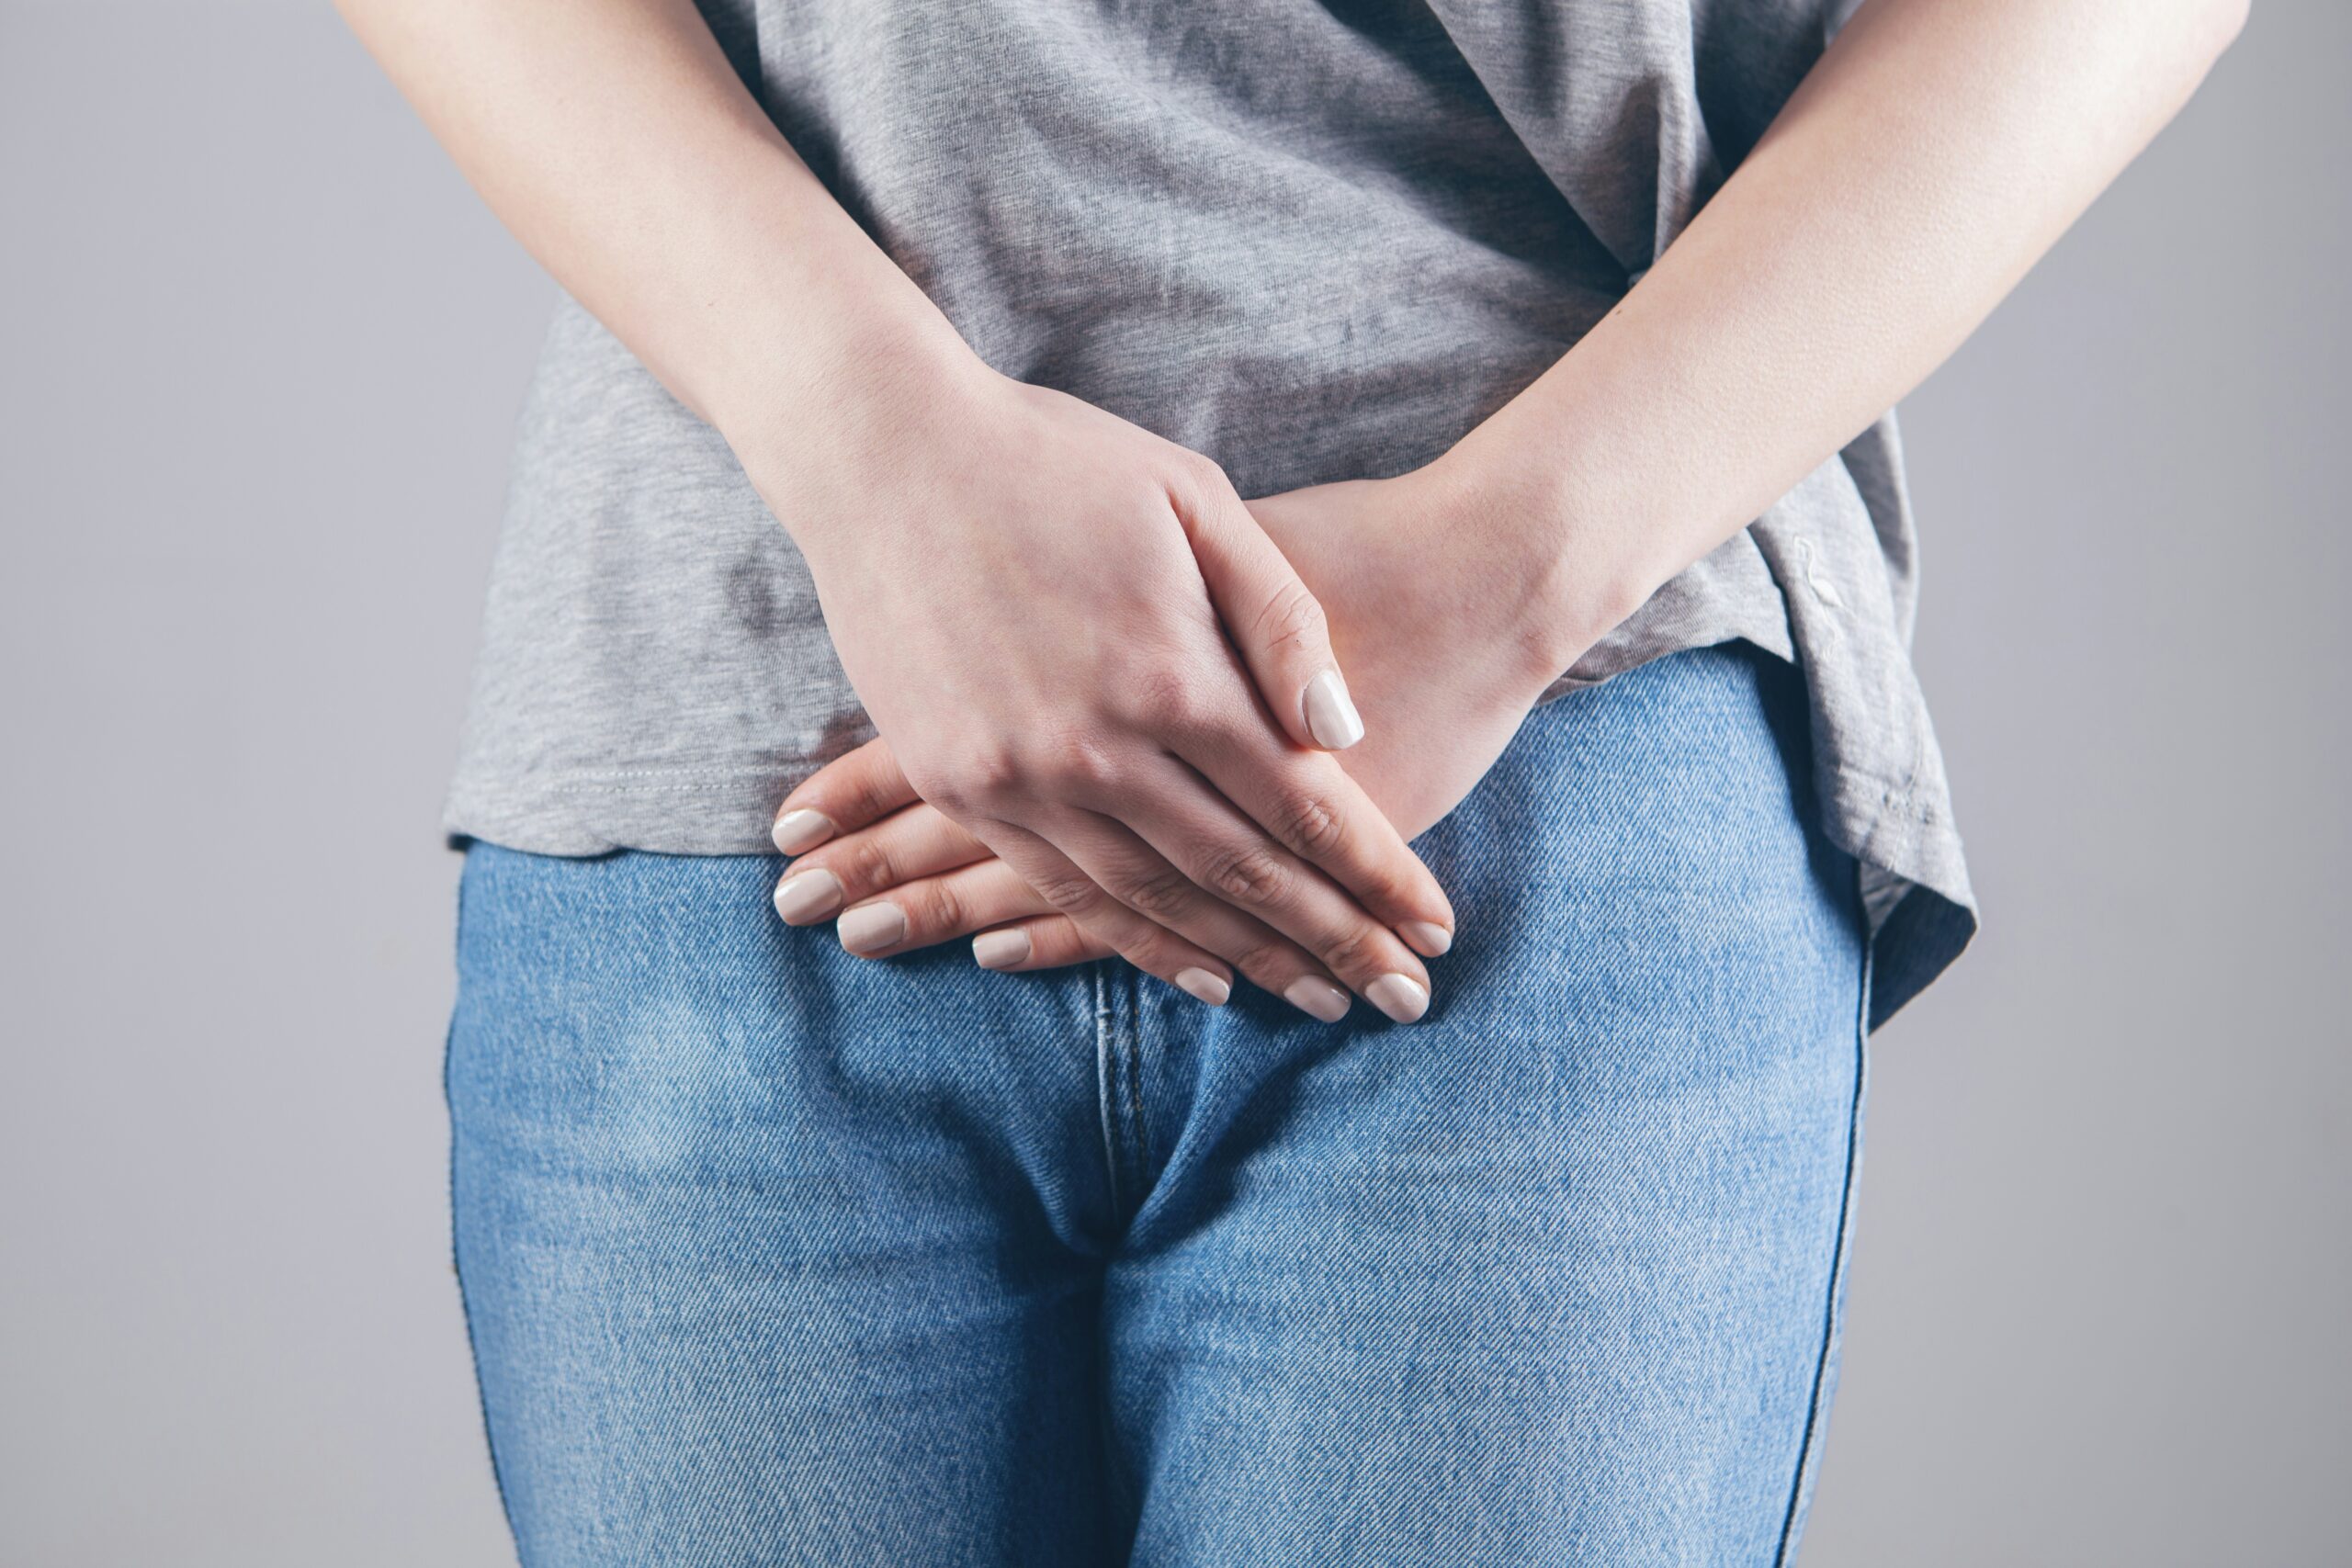 Bacterial Vaginosis: What Is, Causes, Symptoms, and Diagnosis